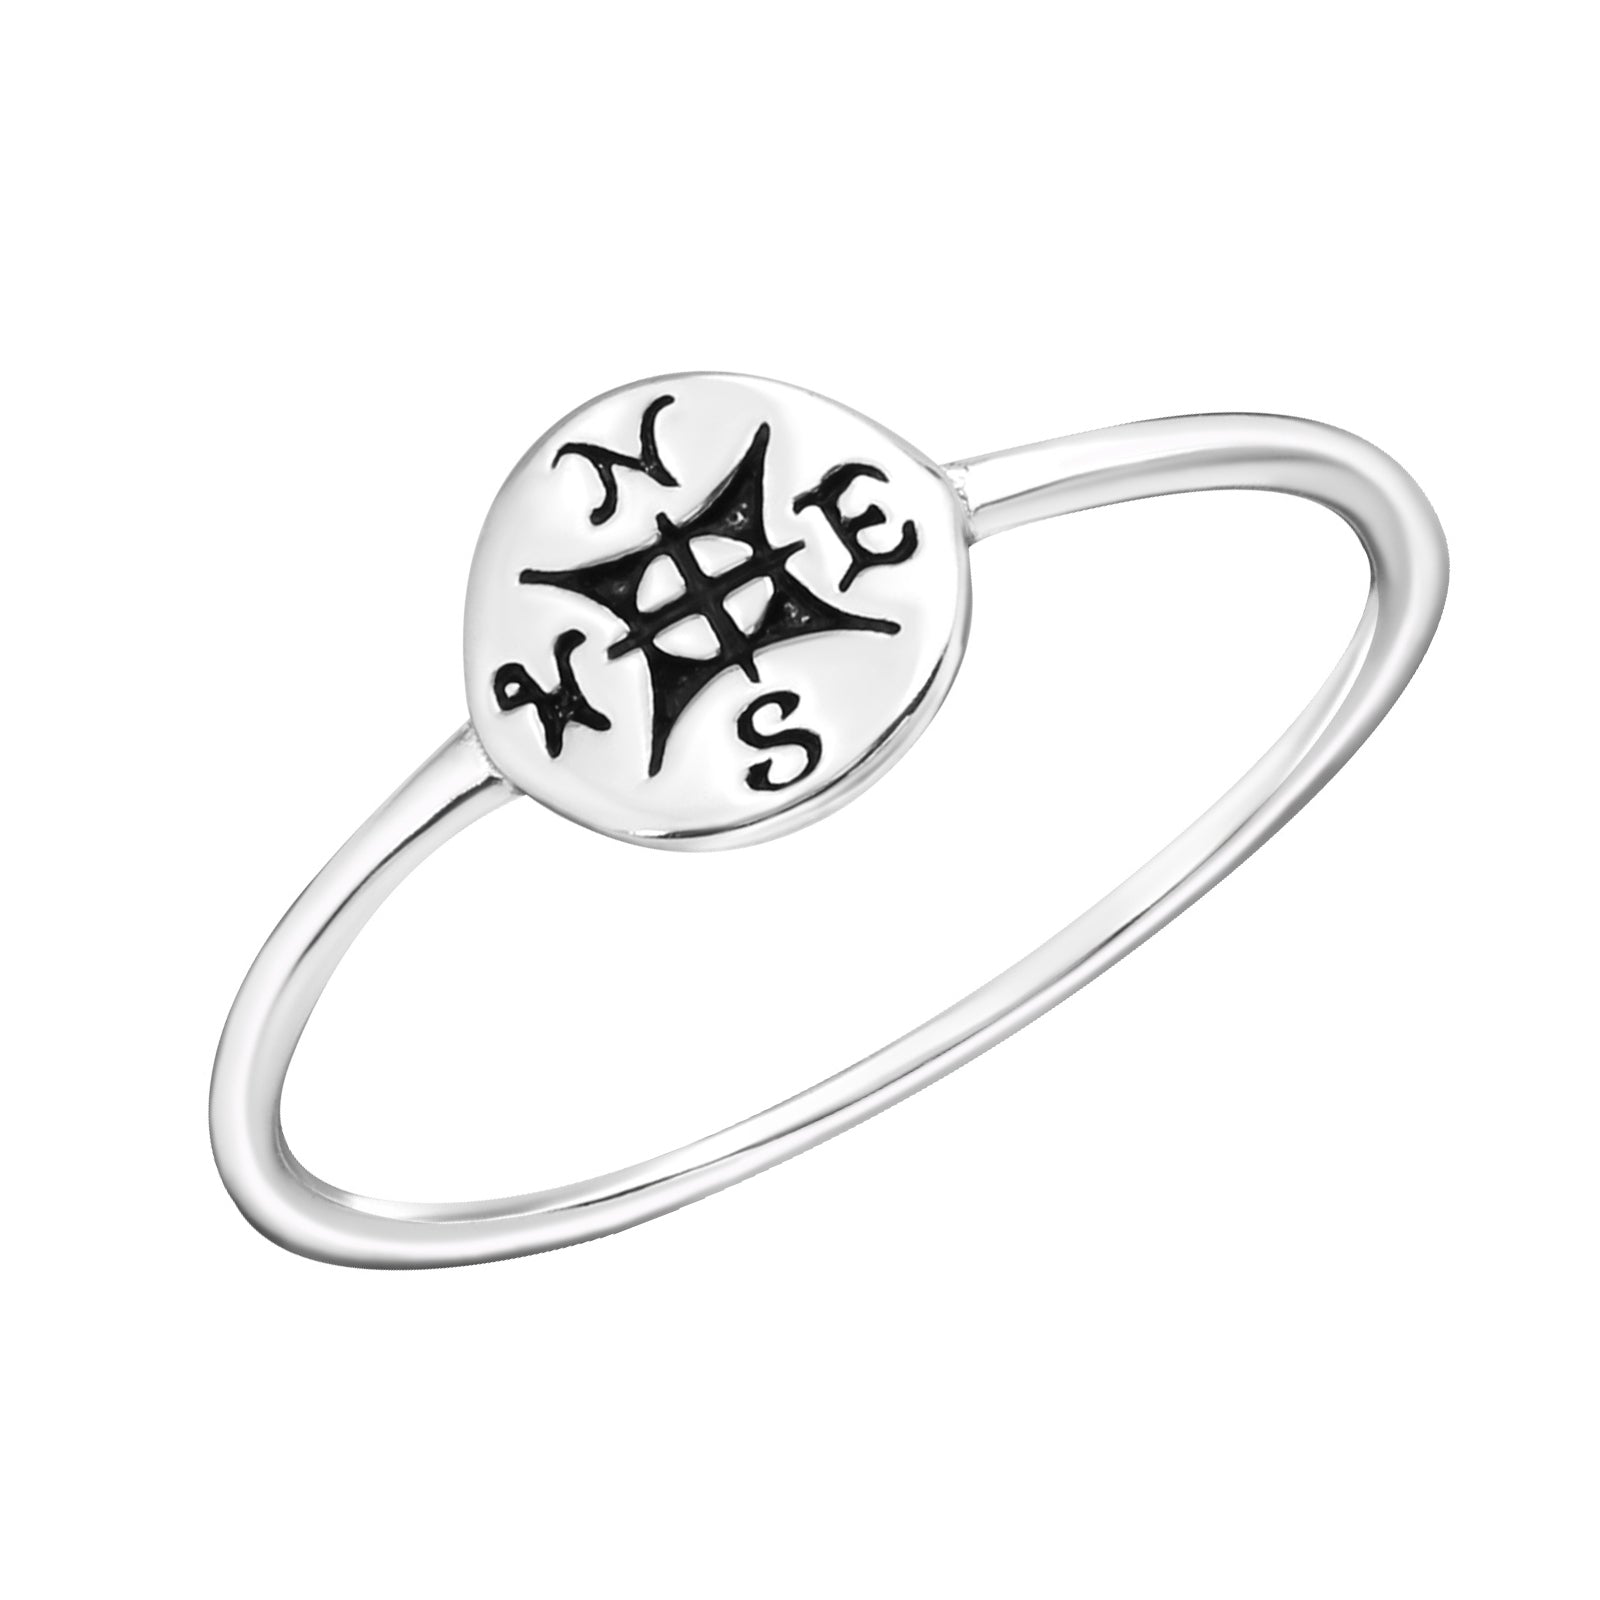 INEL ARGINT 925 BUSOLA rings > silver ring > compass ring > gifts for her > gifts for girls > gifts for moms > gifts for best friend > birthday gift Maison la Stephanie   